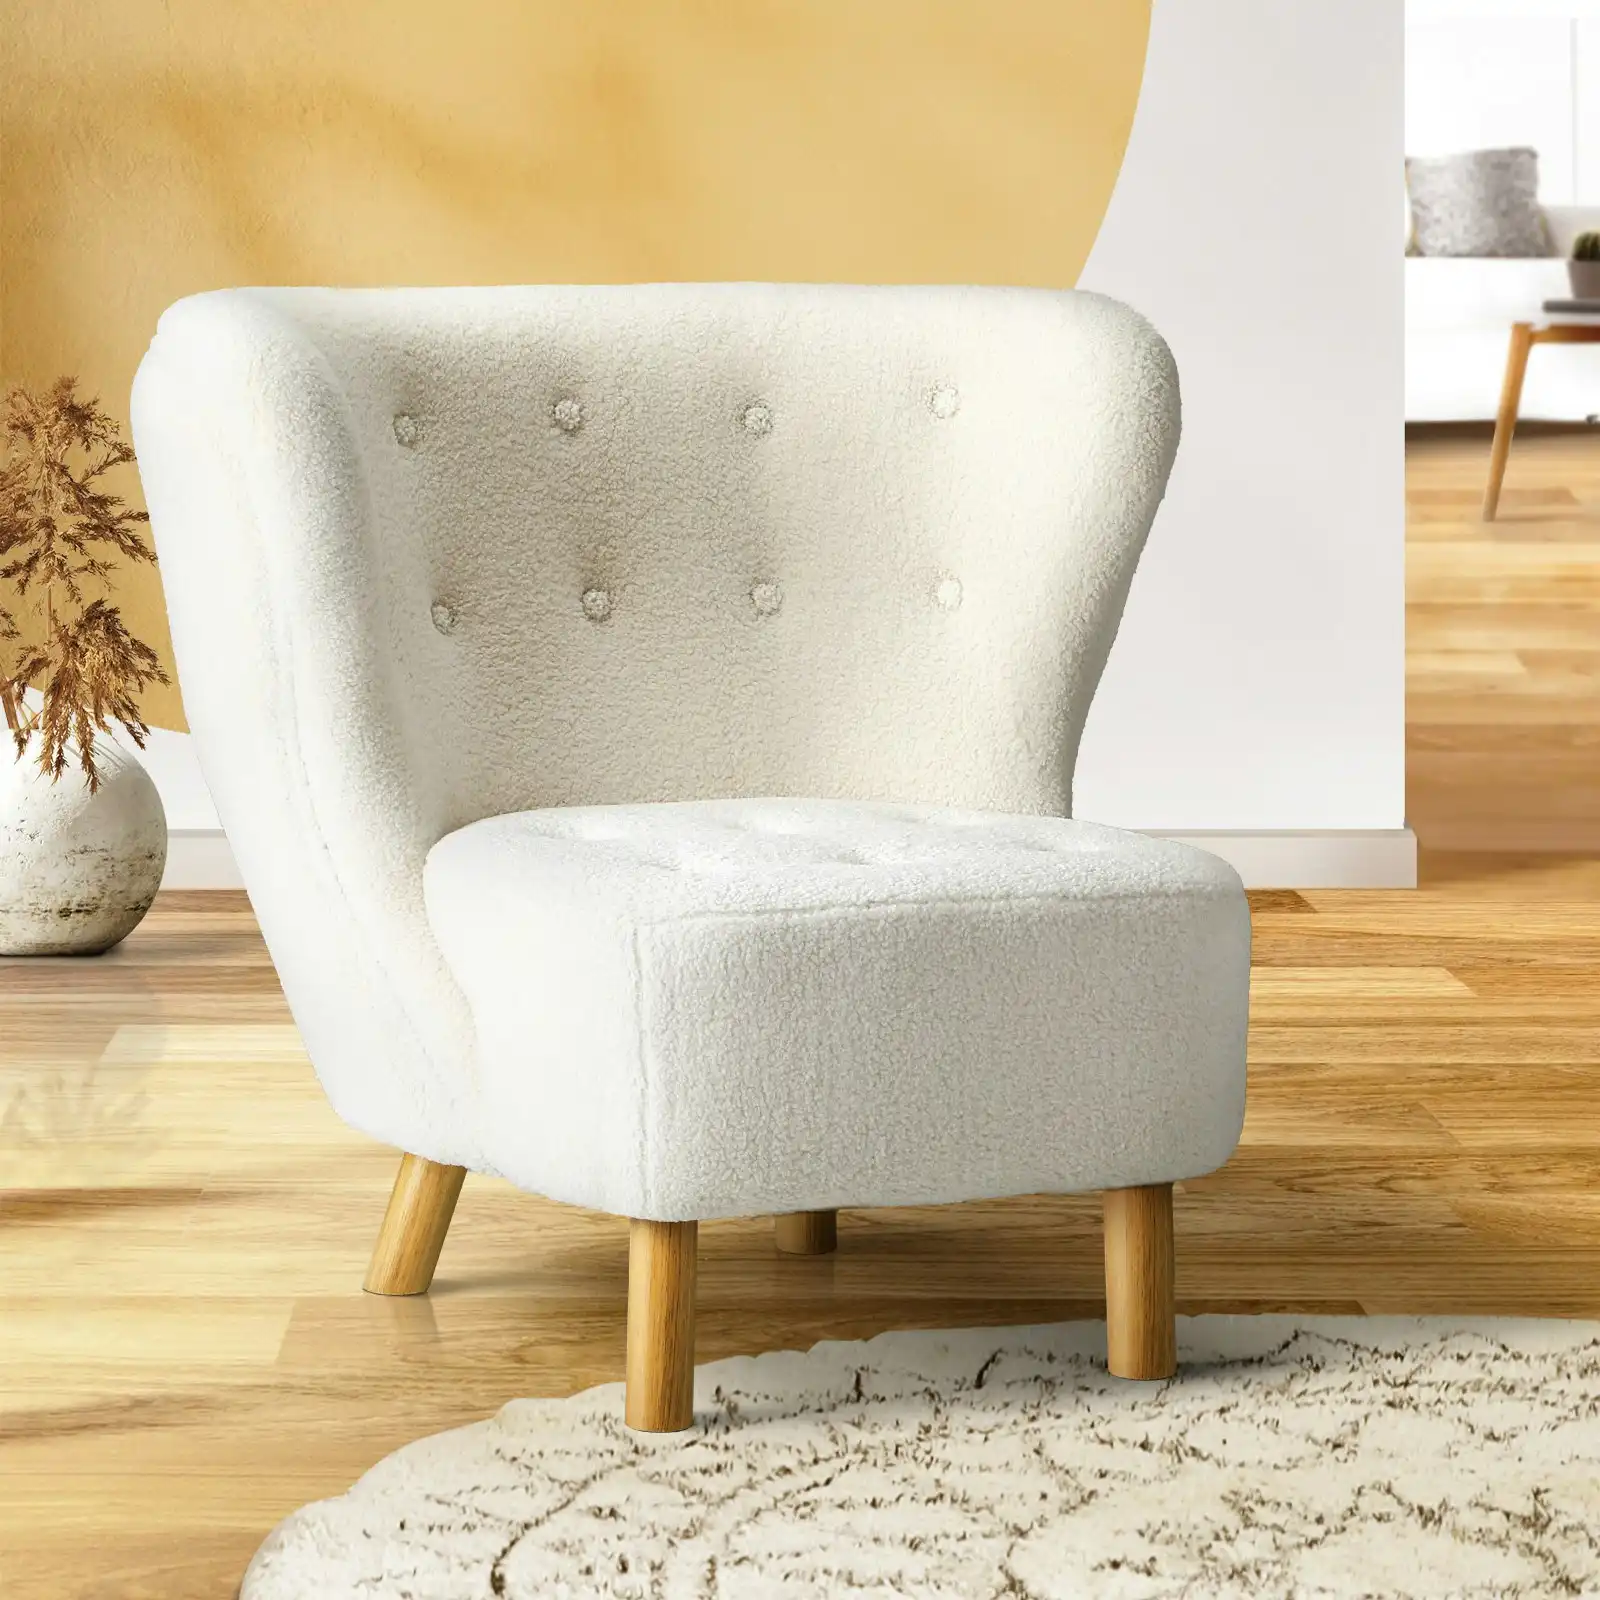 Oikiture Armchair Lounge Accent Chair Armchairs Couches Sofa Bedroom Wood White